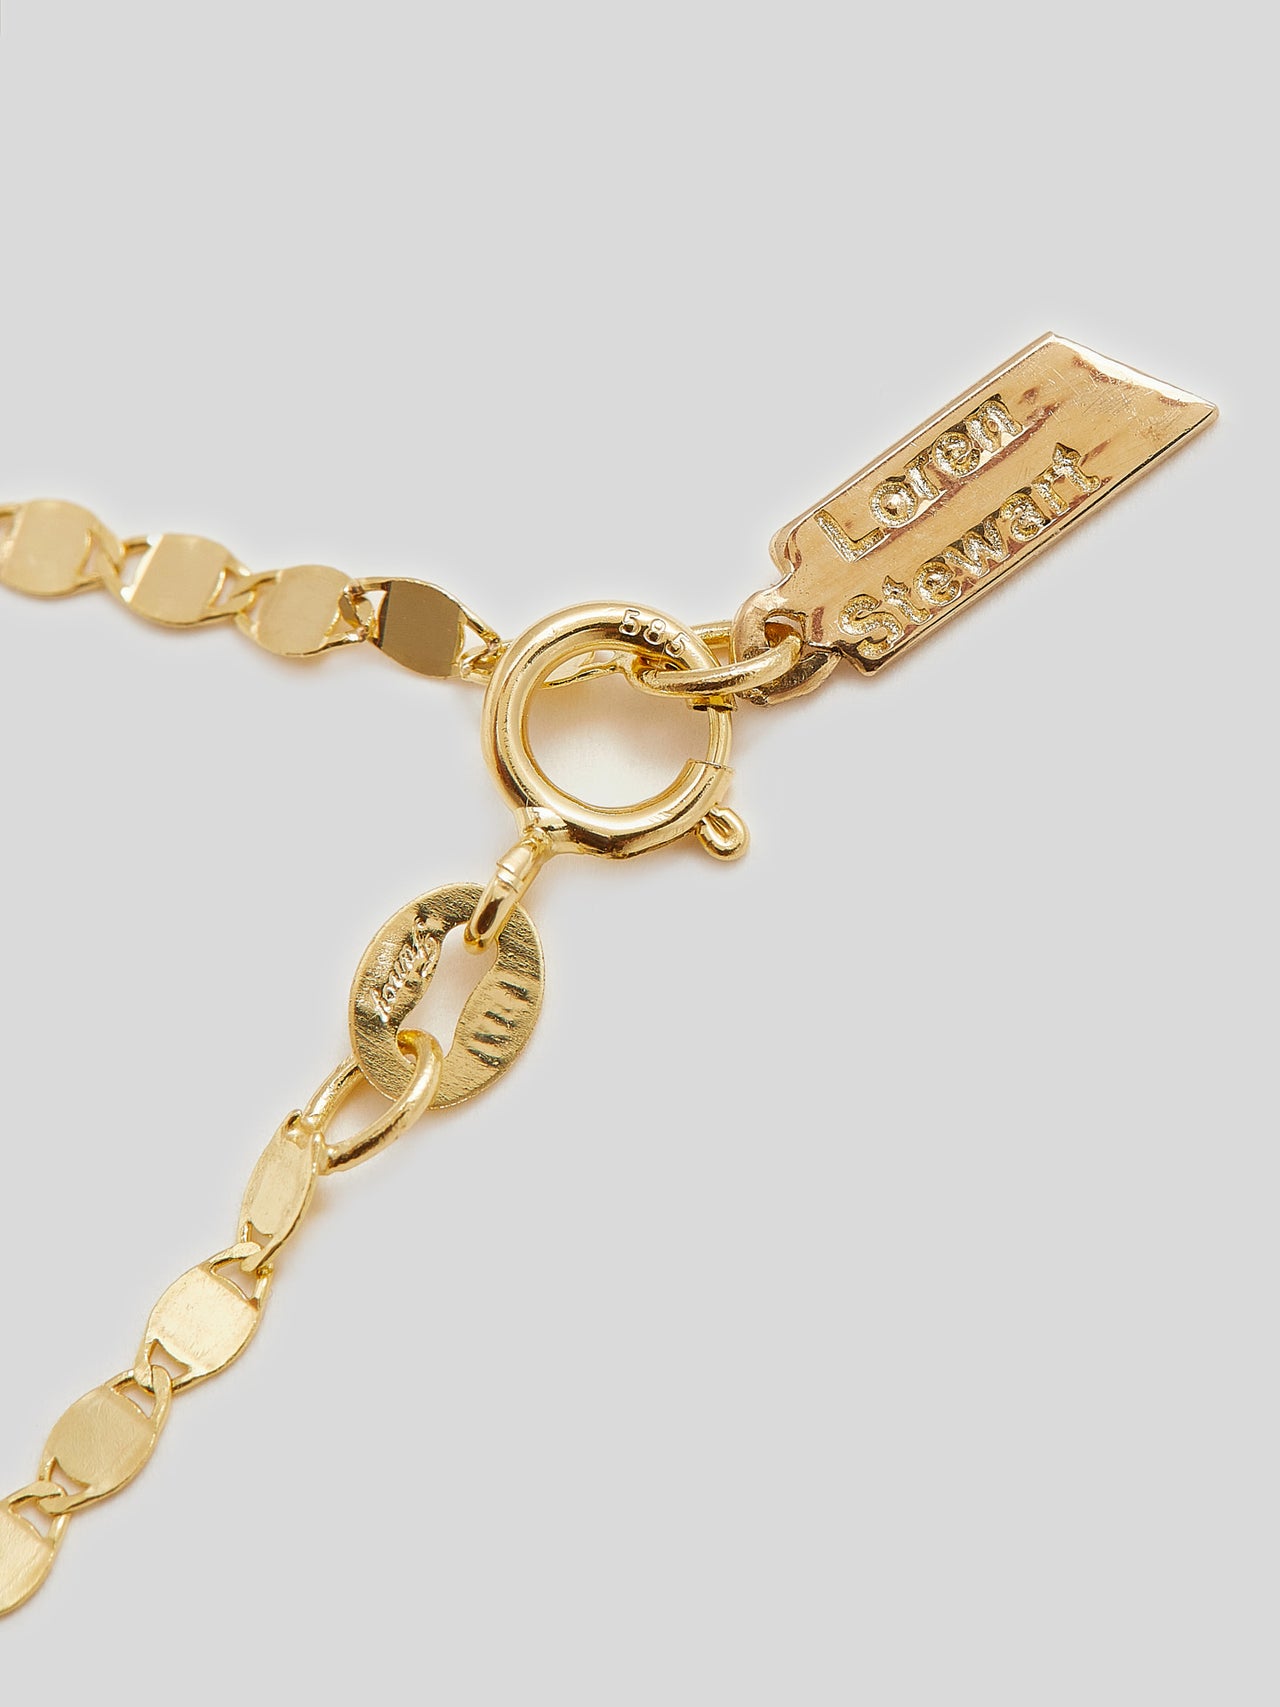 Close up of logo and clasp on Product image of yellow gold valentino chain necklace on white background. 